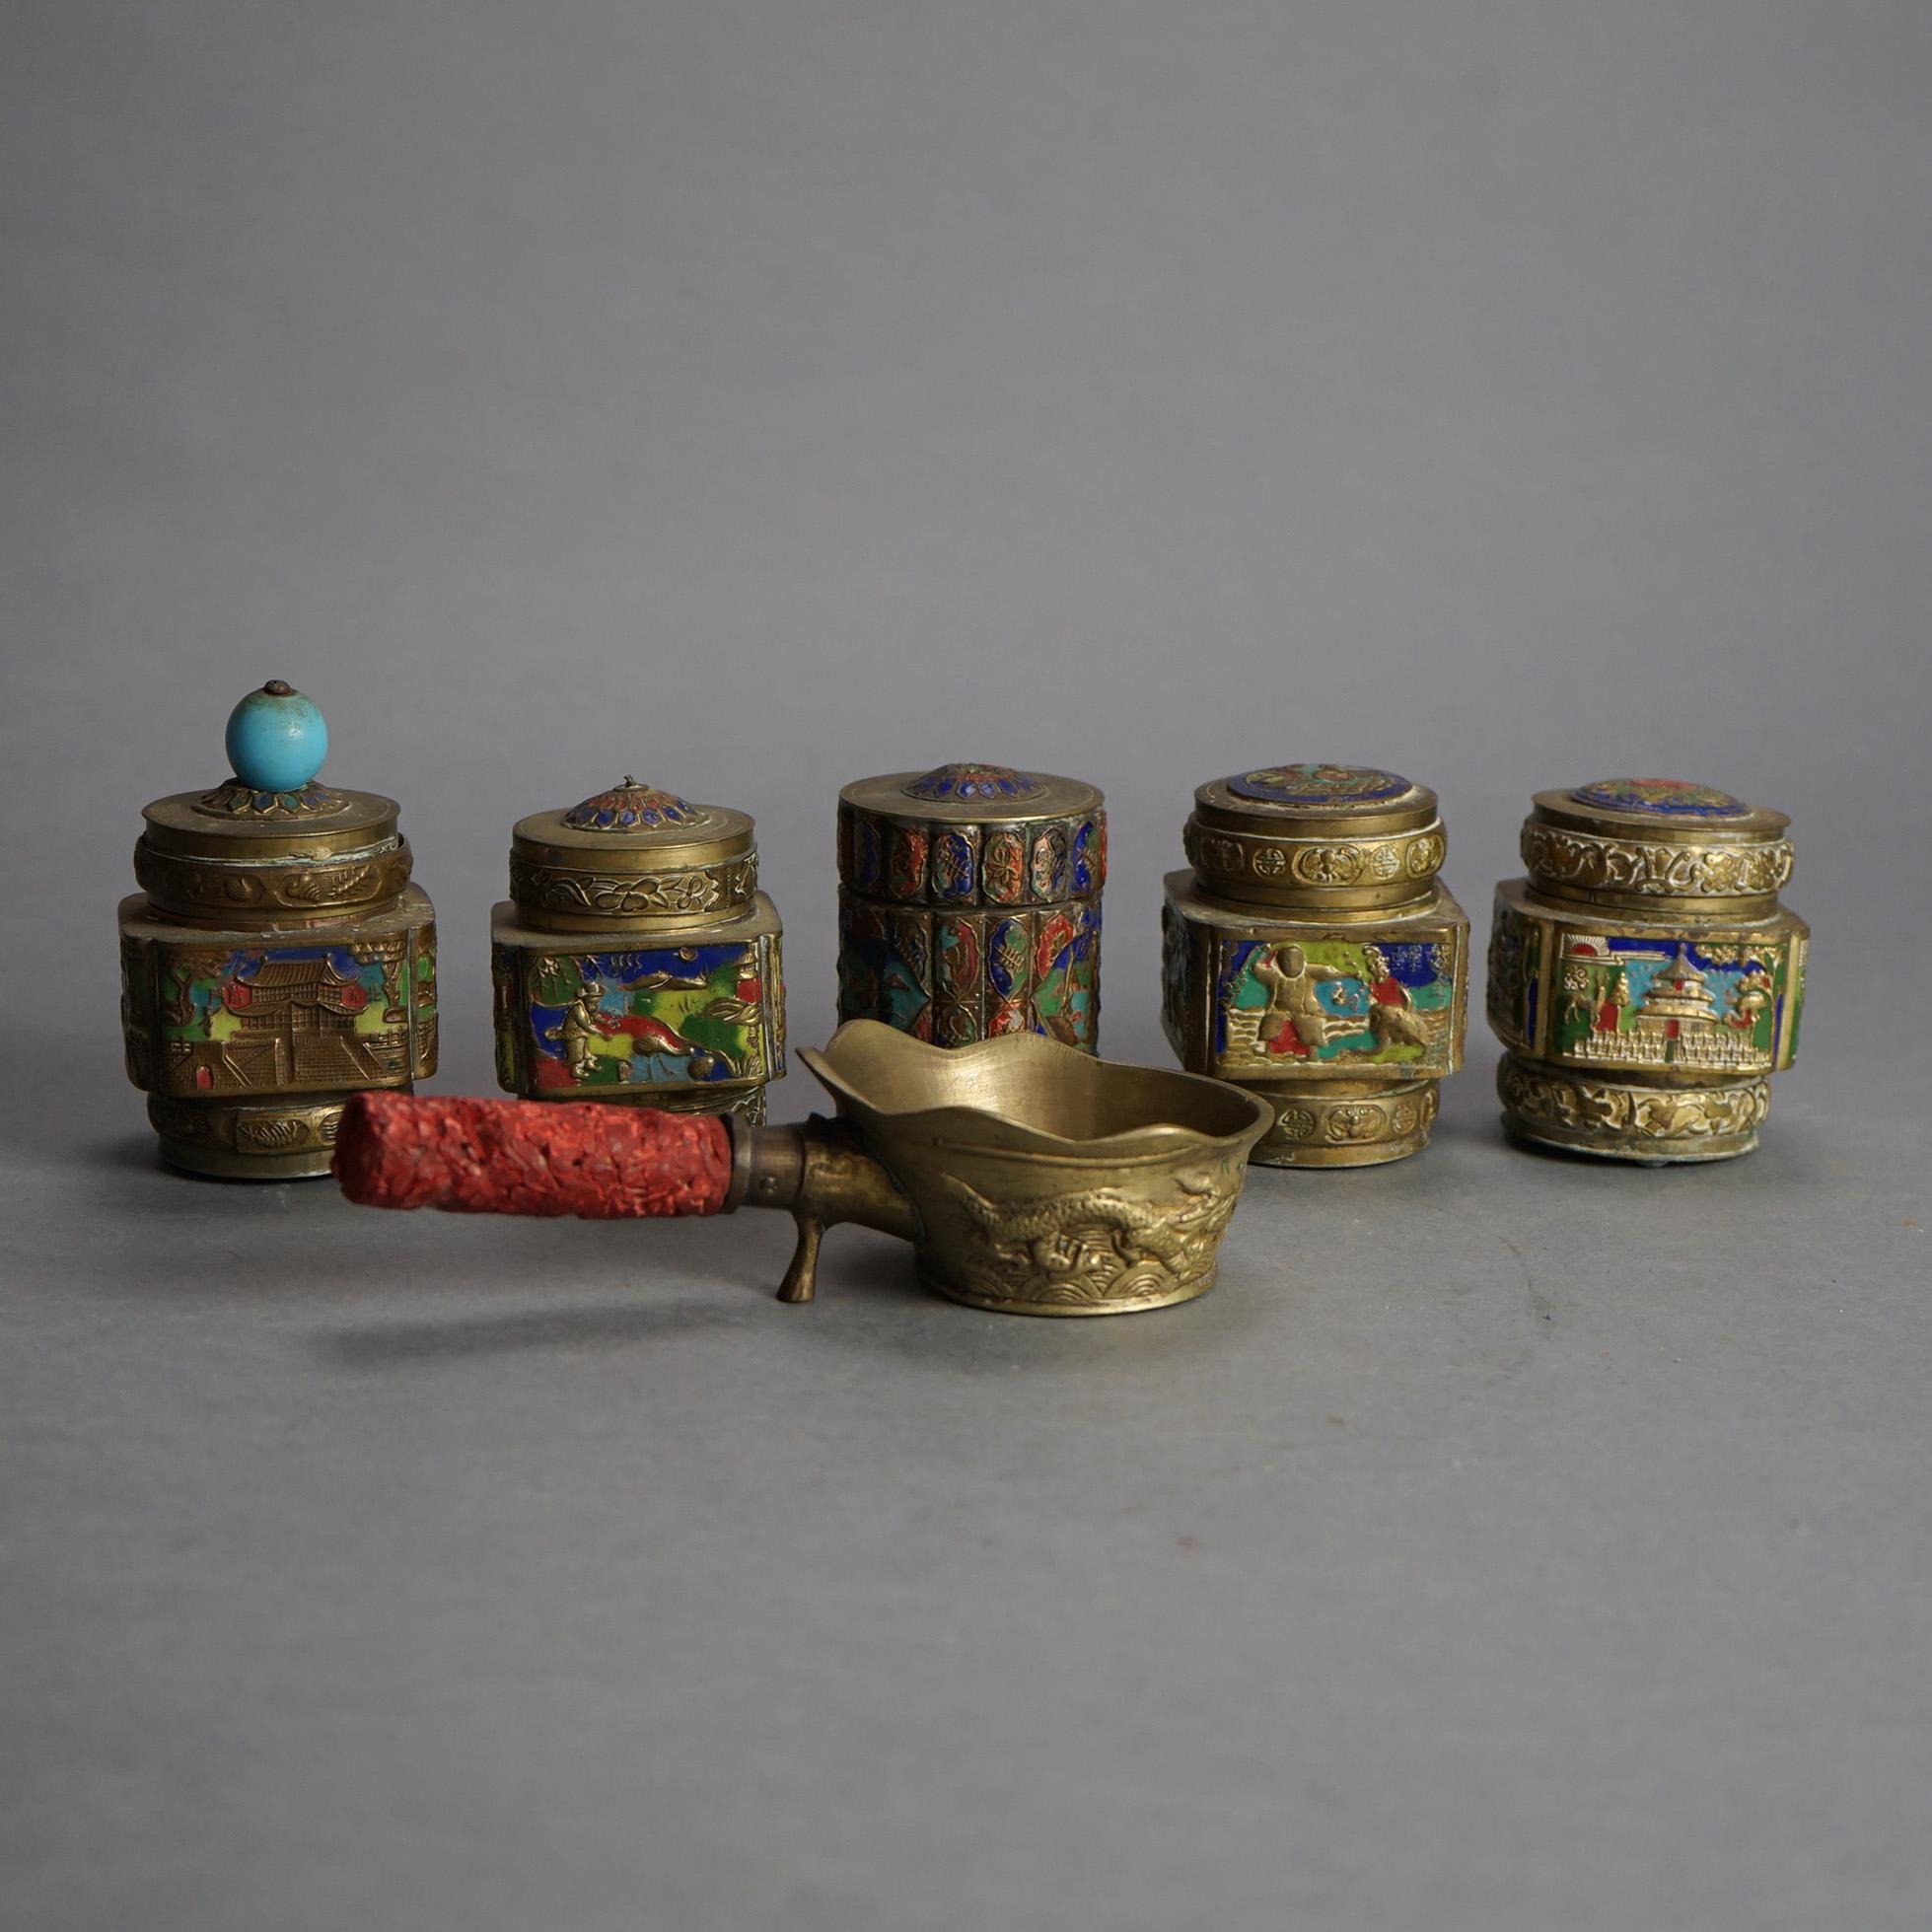 Six Antique Chinese Bronze and Enameled Scent Jars C1920

Measures - Handled dish 3